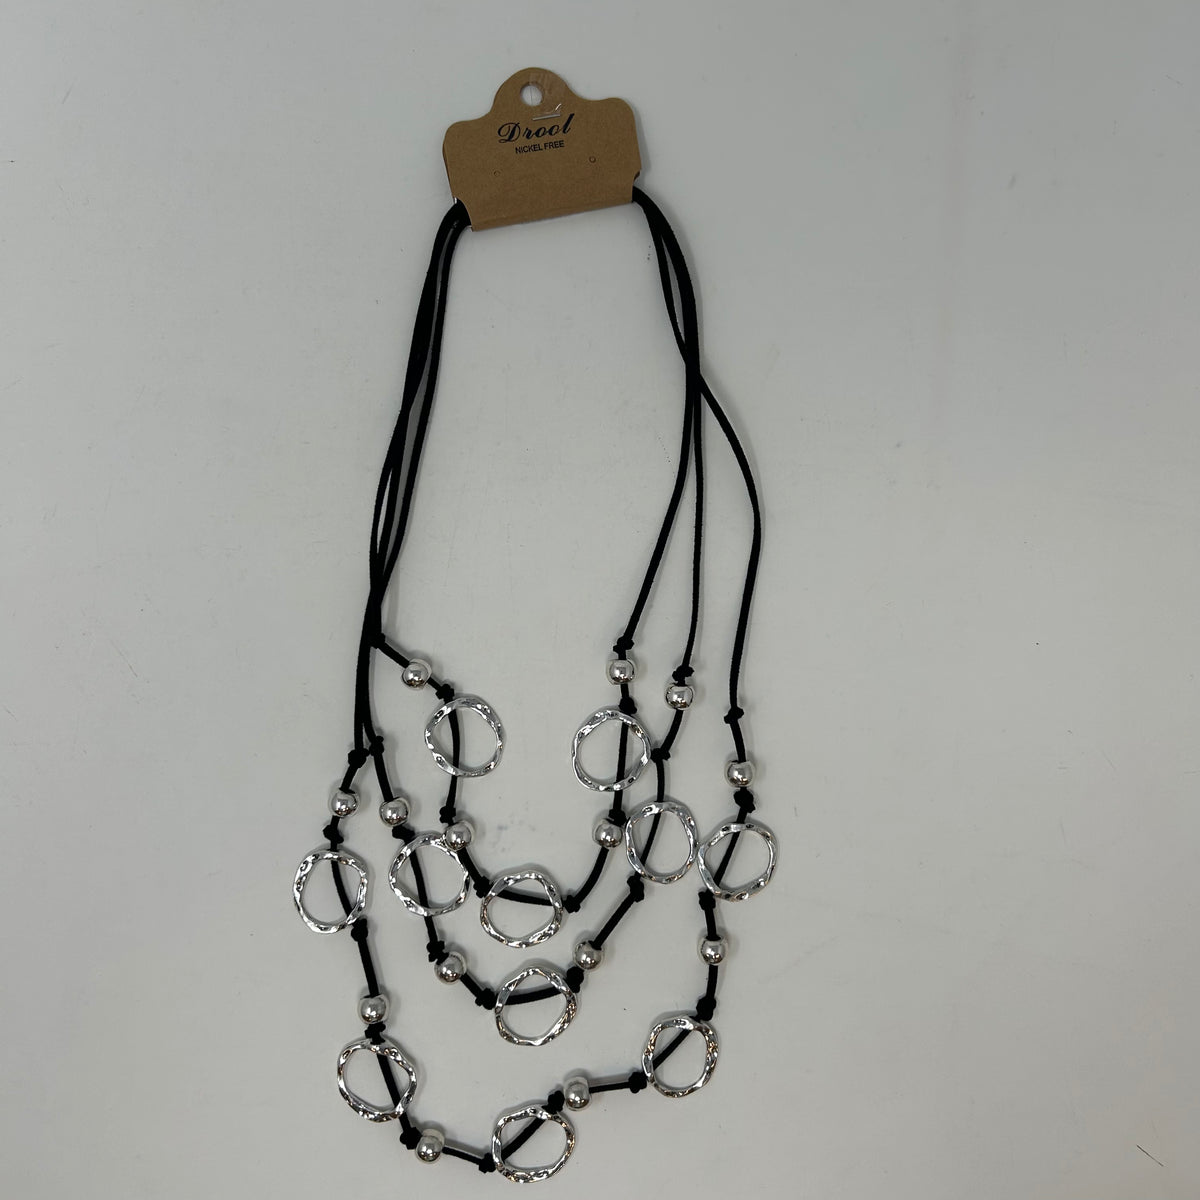 3 Strand Suede Necklace w/ Silver Circles